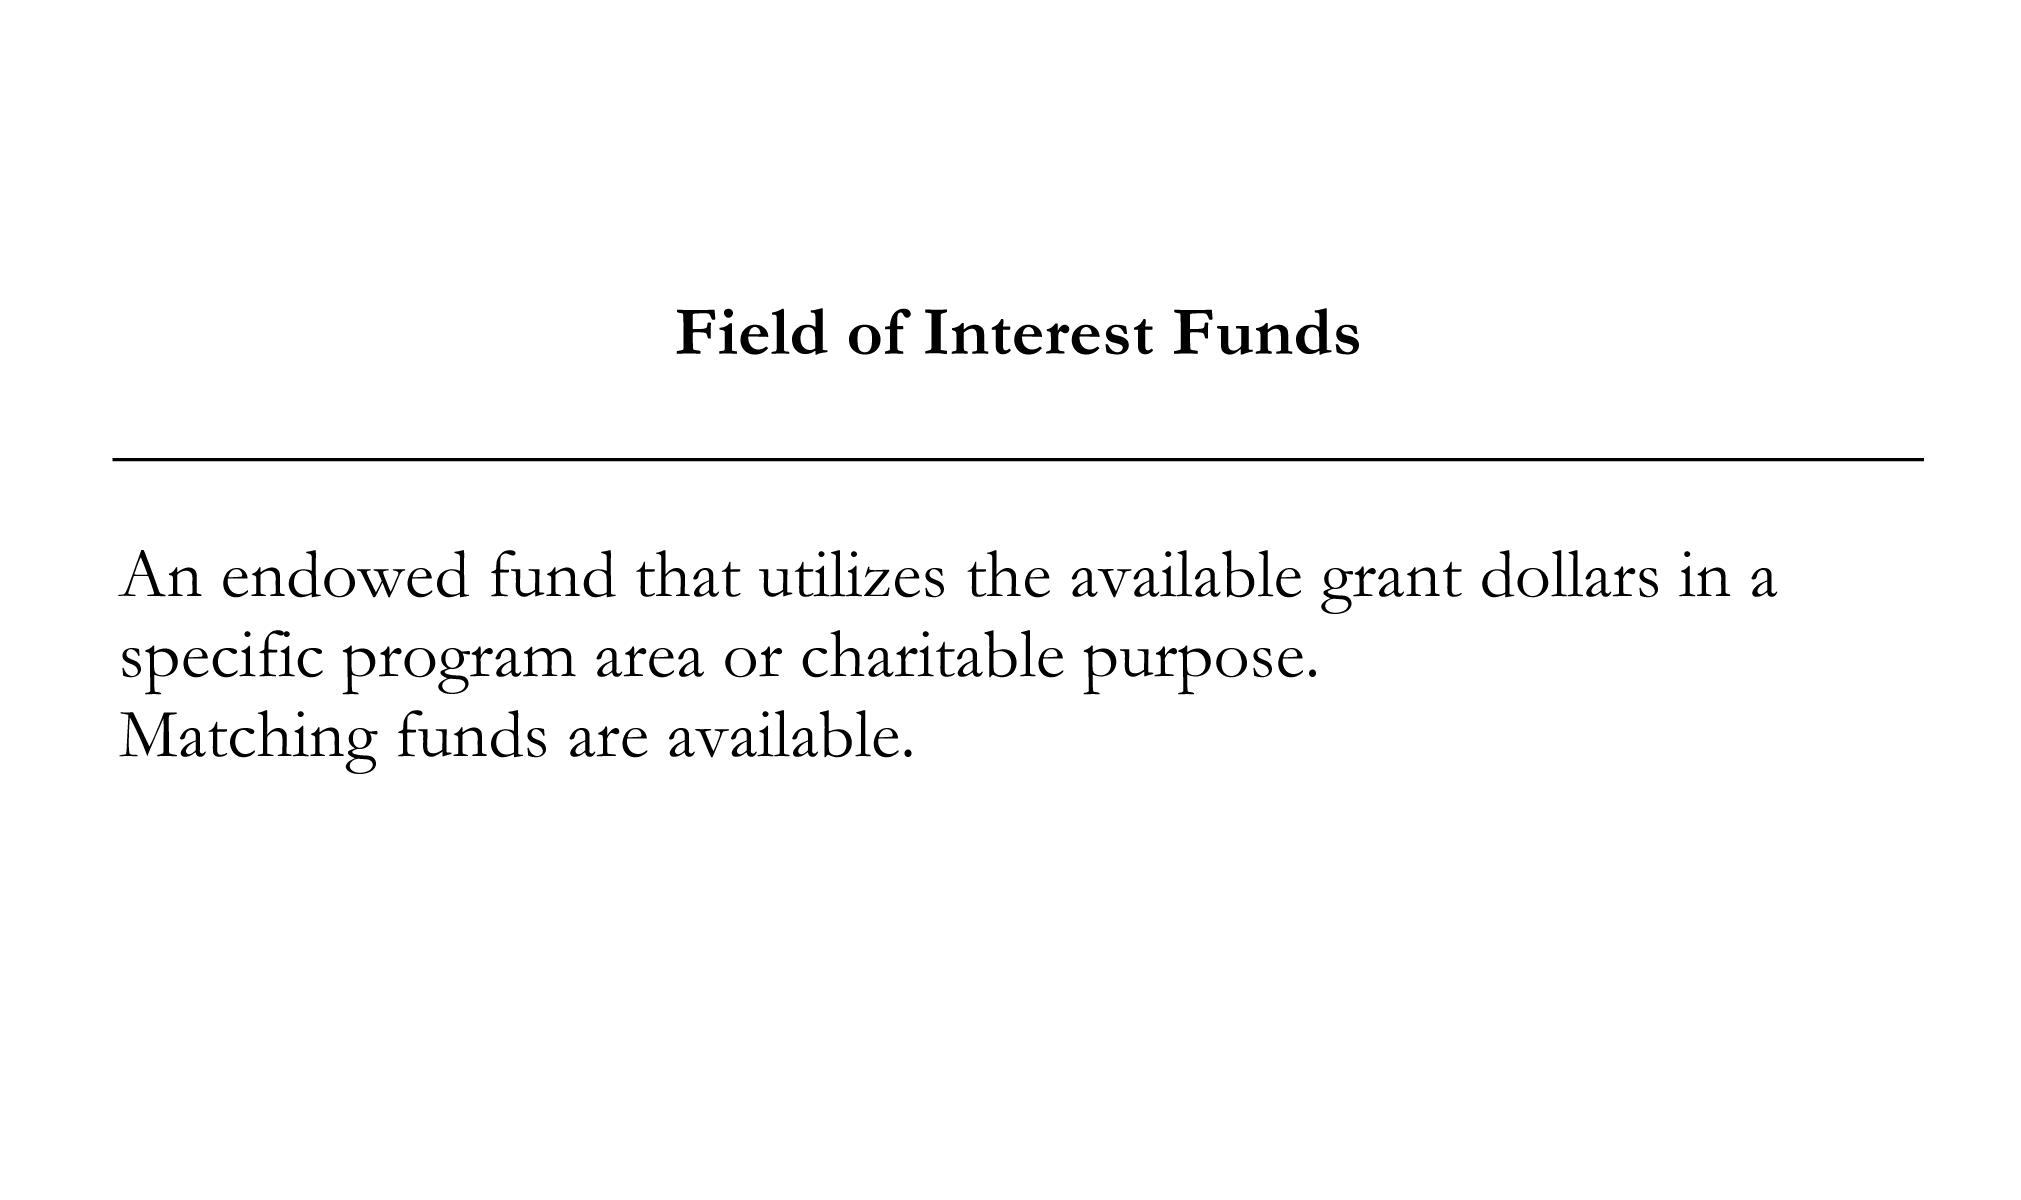 Field of Interest Funds.png